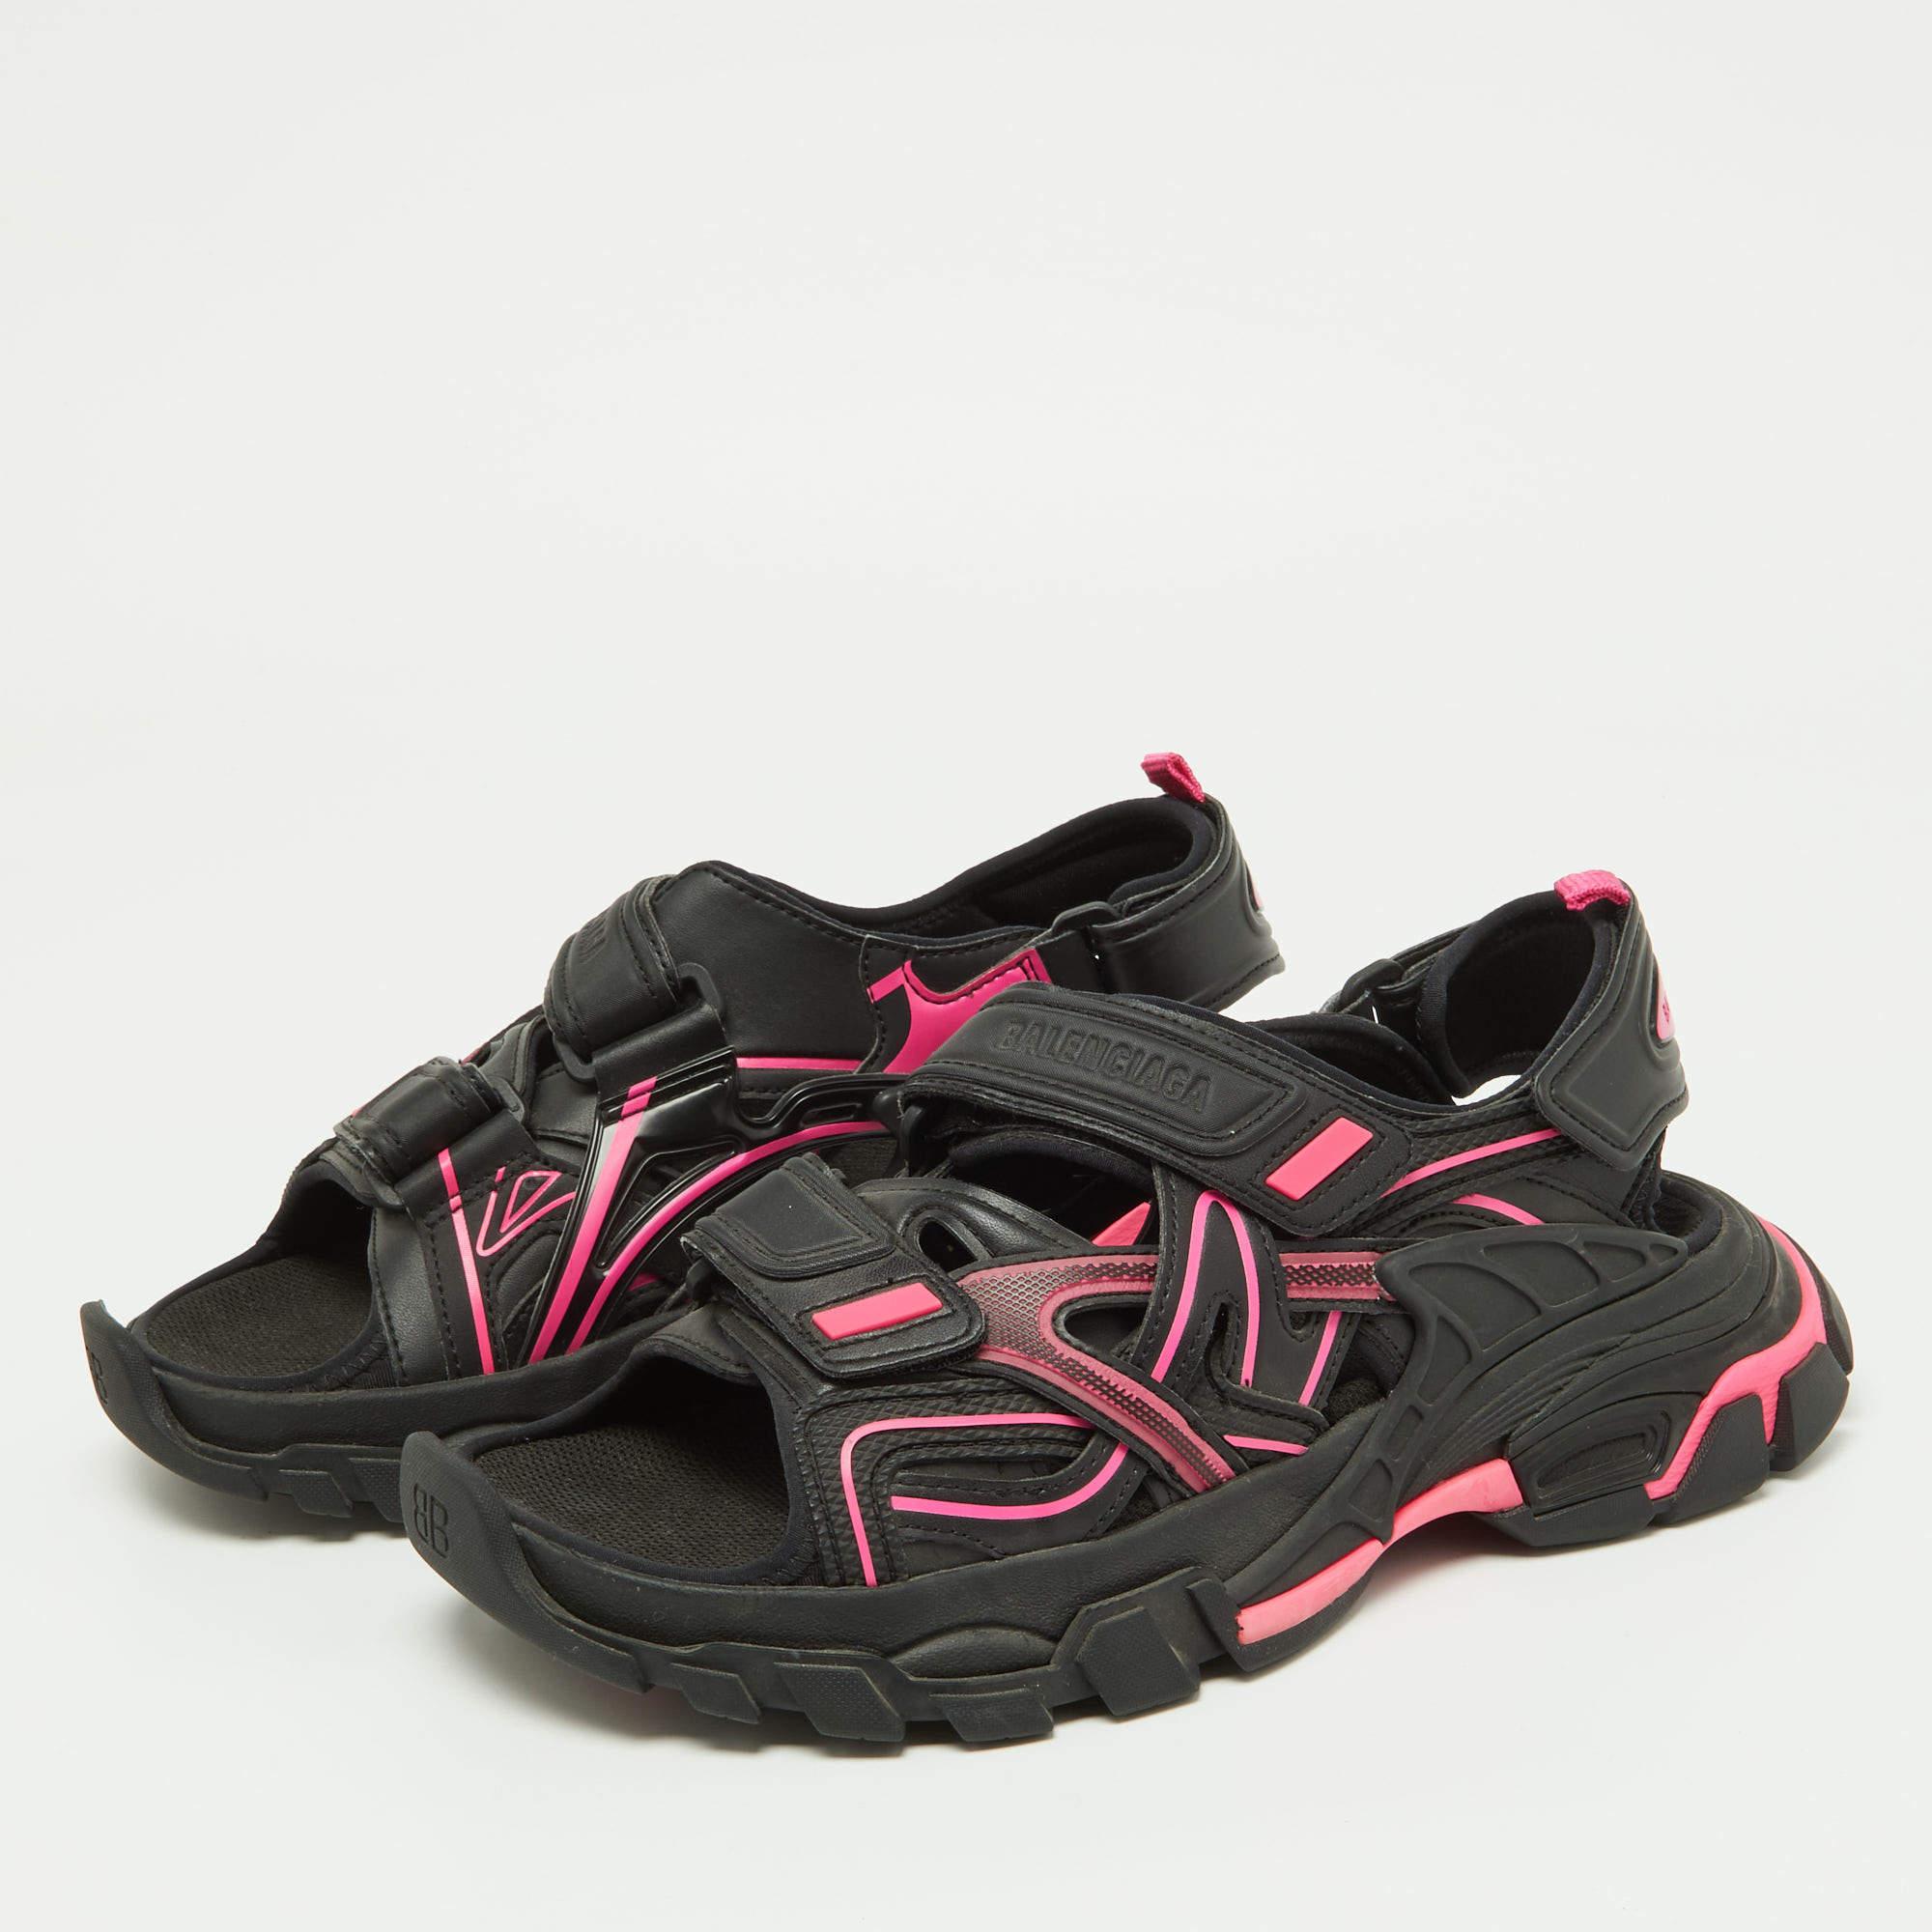 Balenciaga Black/Pink Leather Track Sandals Size 37 For Sale 1